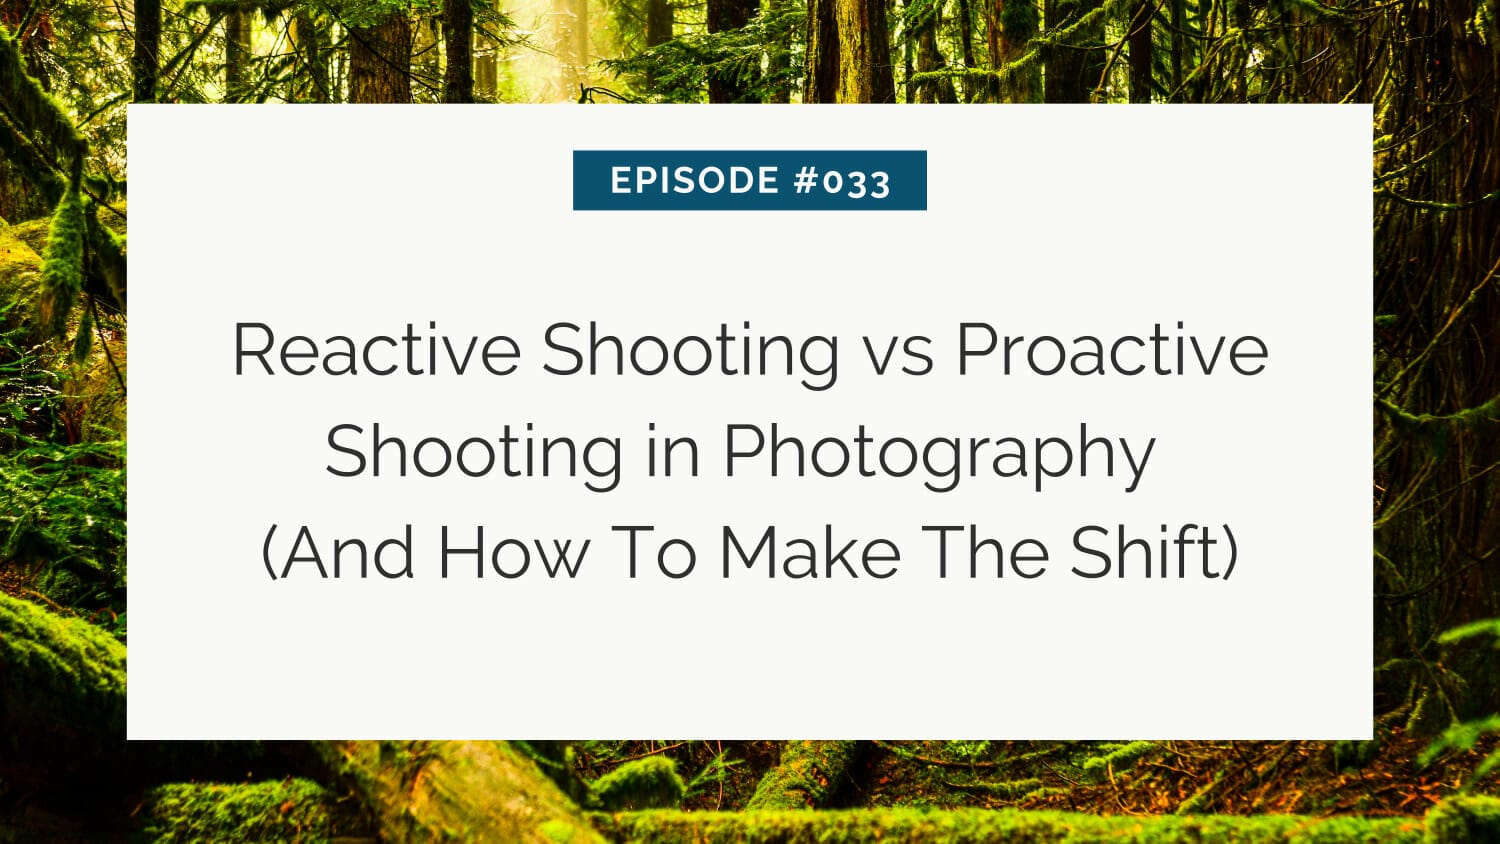 Podcast episode cover with the title "reactive shooting vs proactive shooting in photography (and how to make the shift)" for episode #033, set against a vibrant forest background.